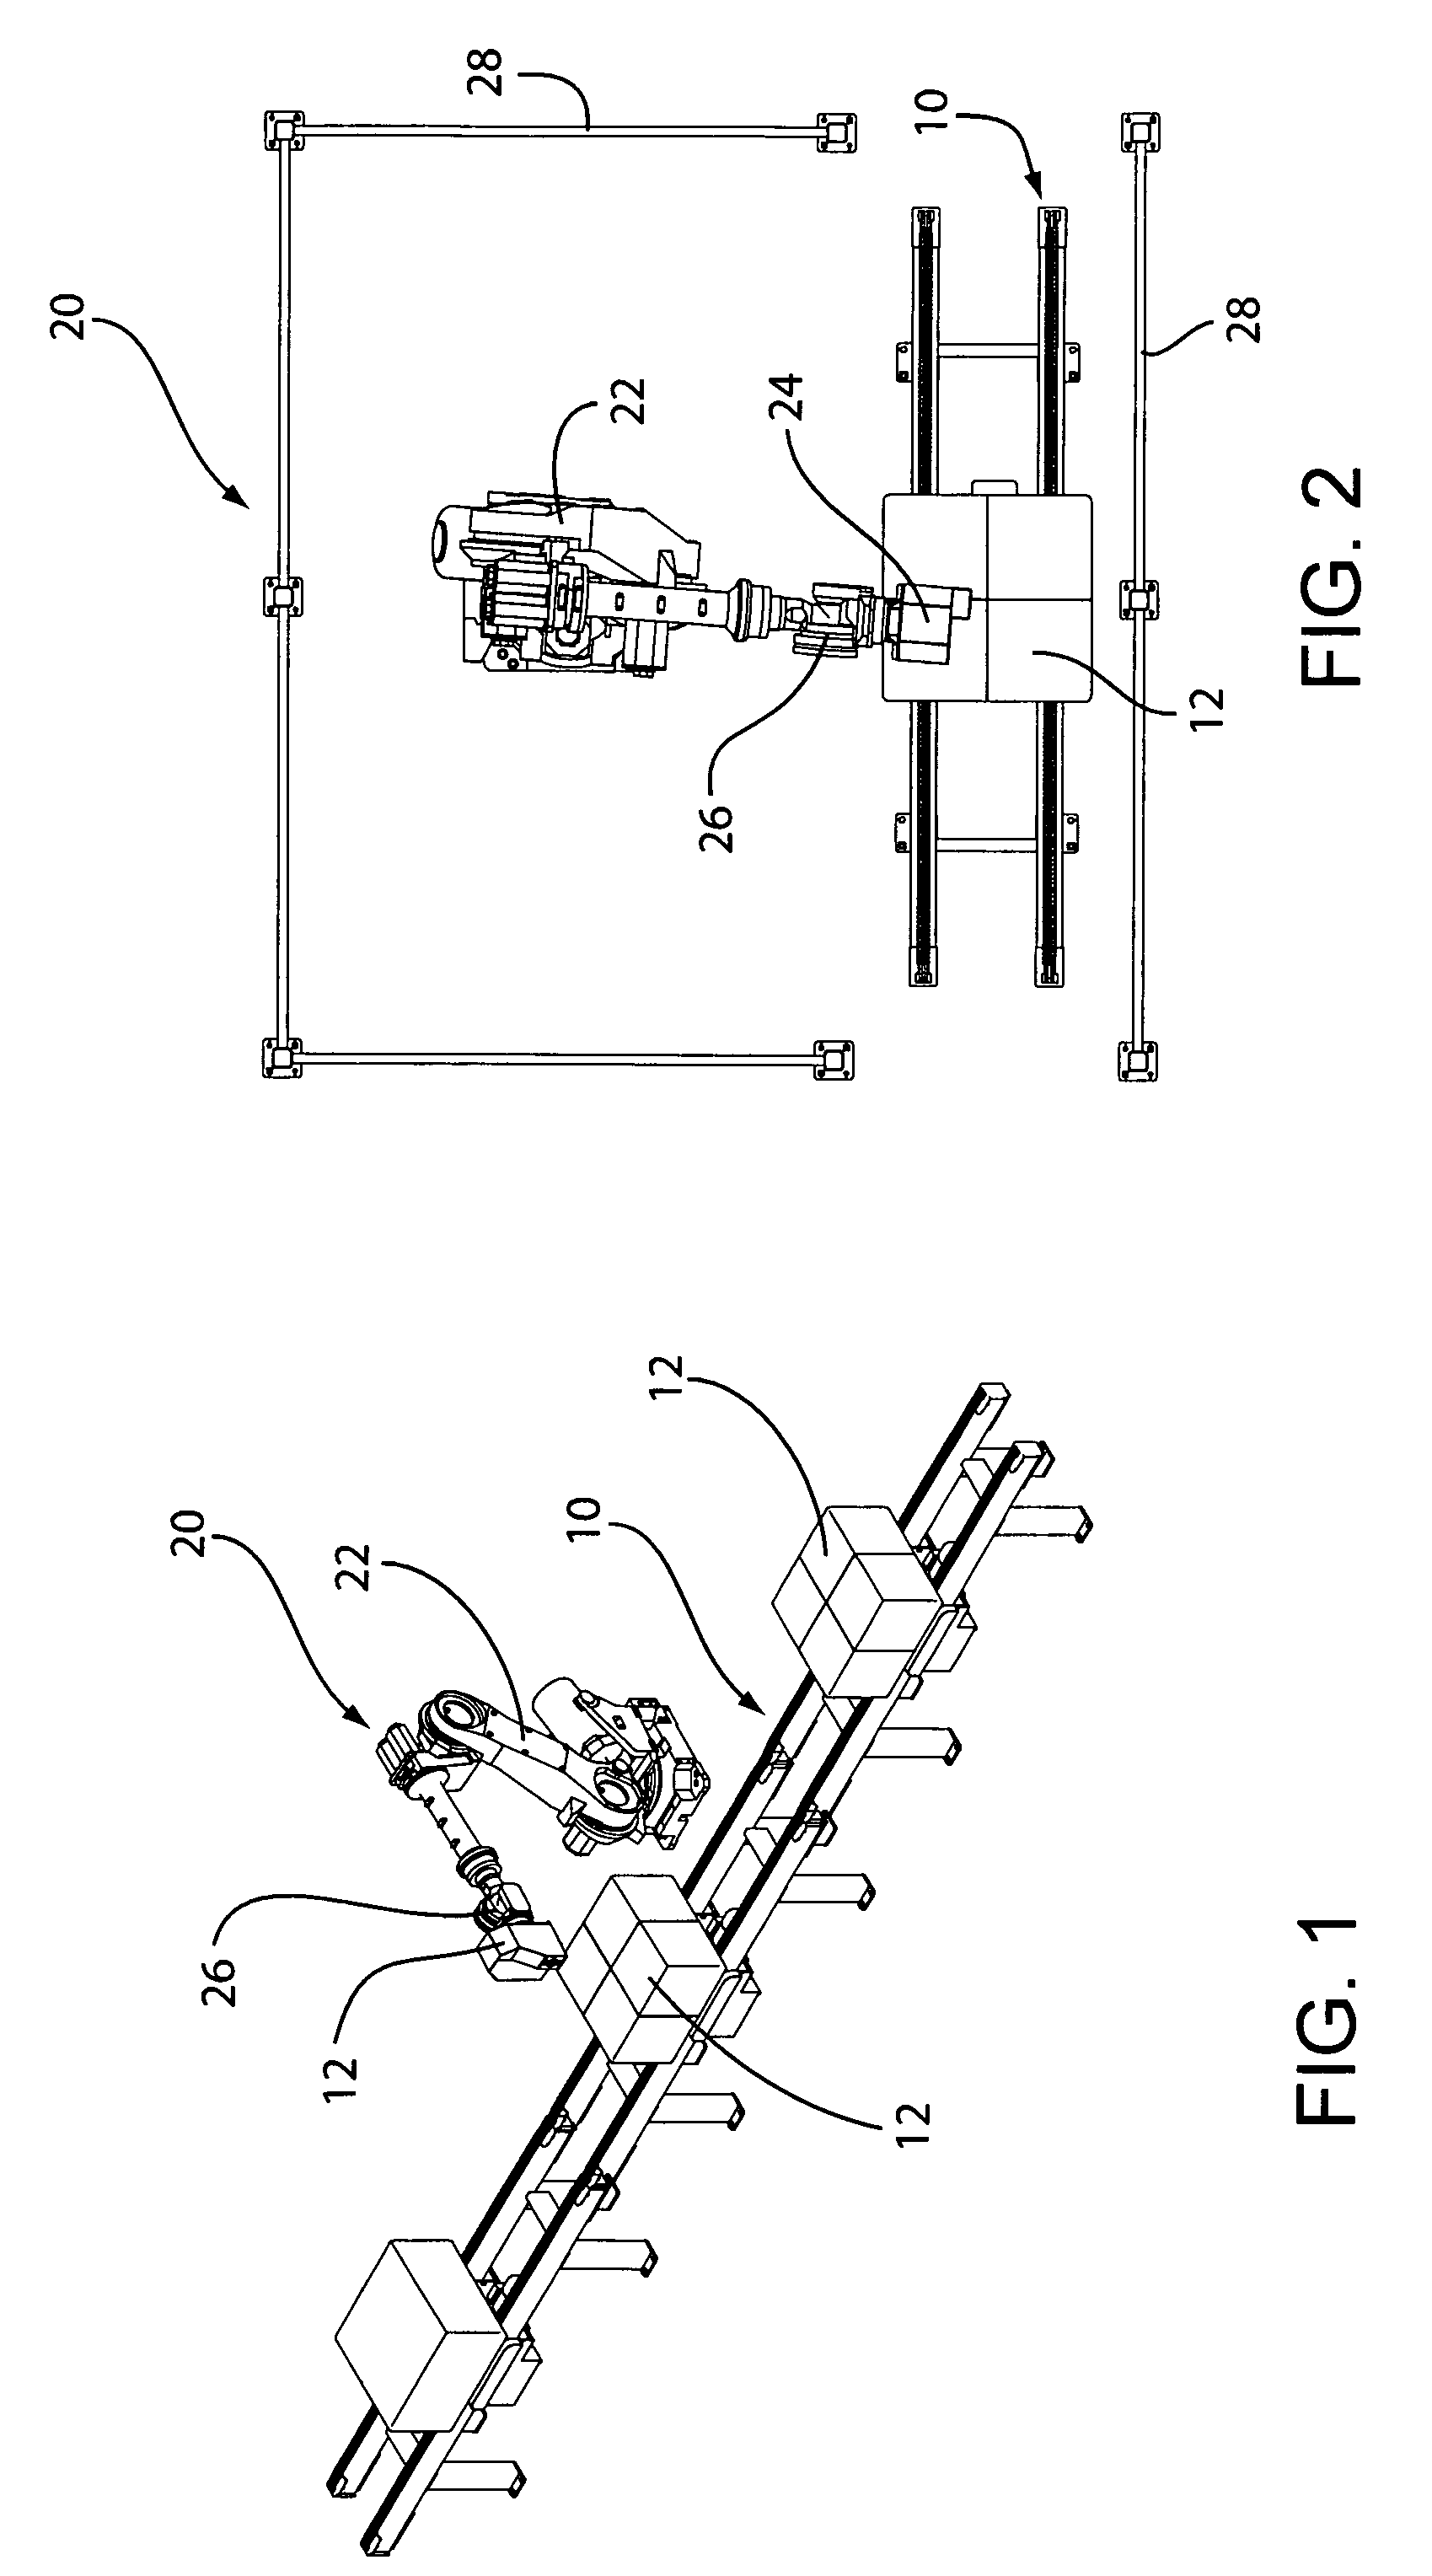 Method and apparatus for removing wires from a bale